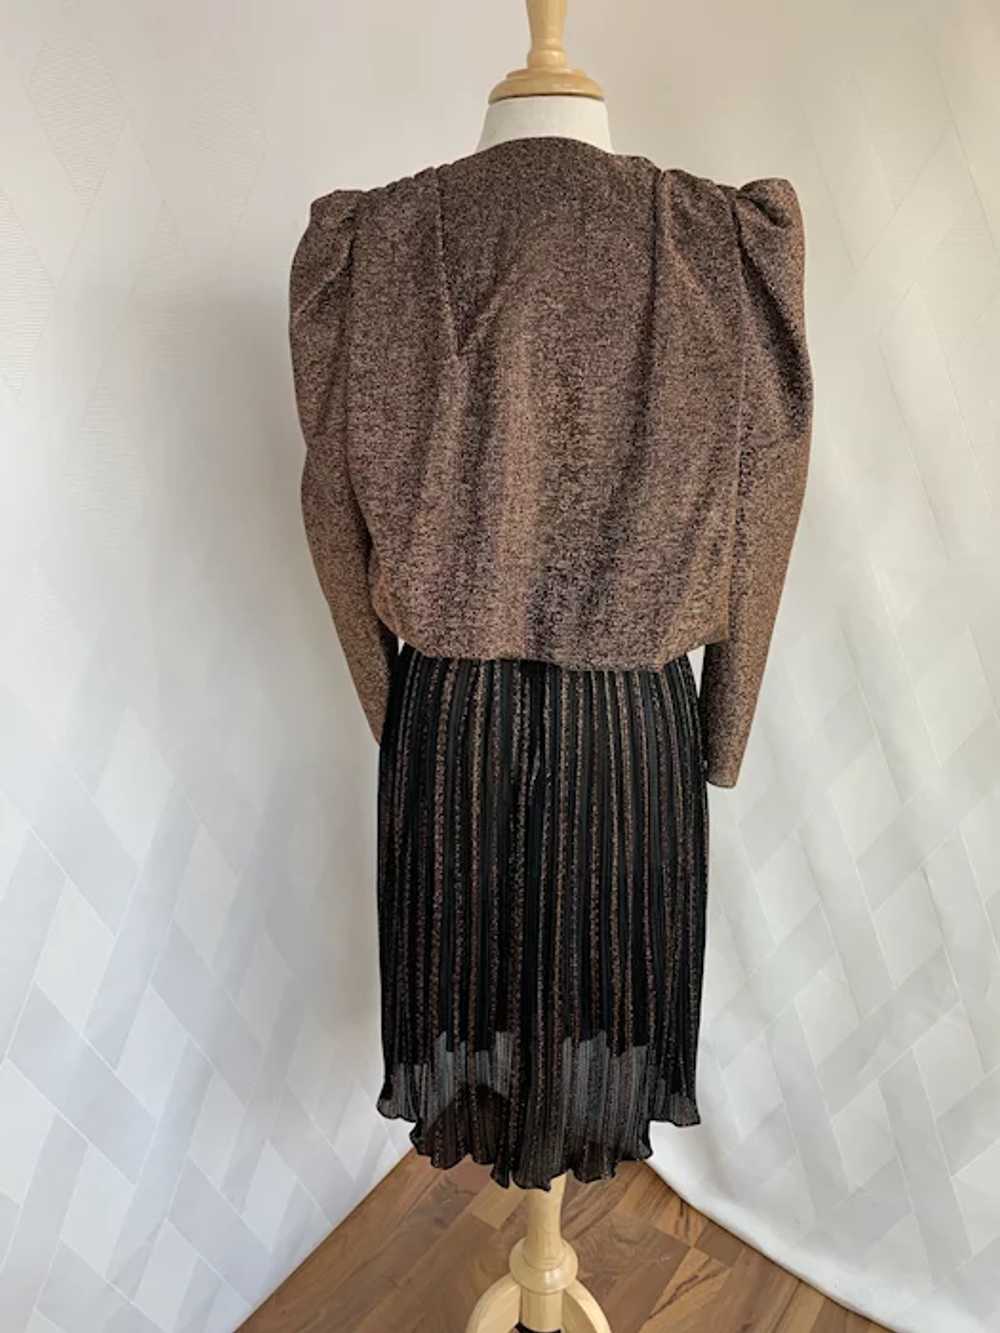 1980s Strappy, Copper Metallic Dress with Jacket - image 5